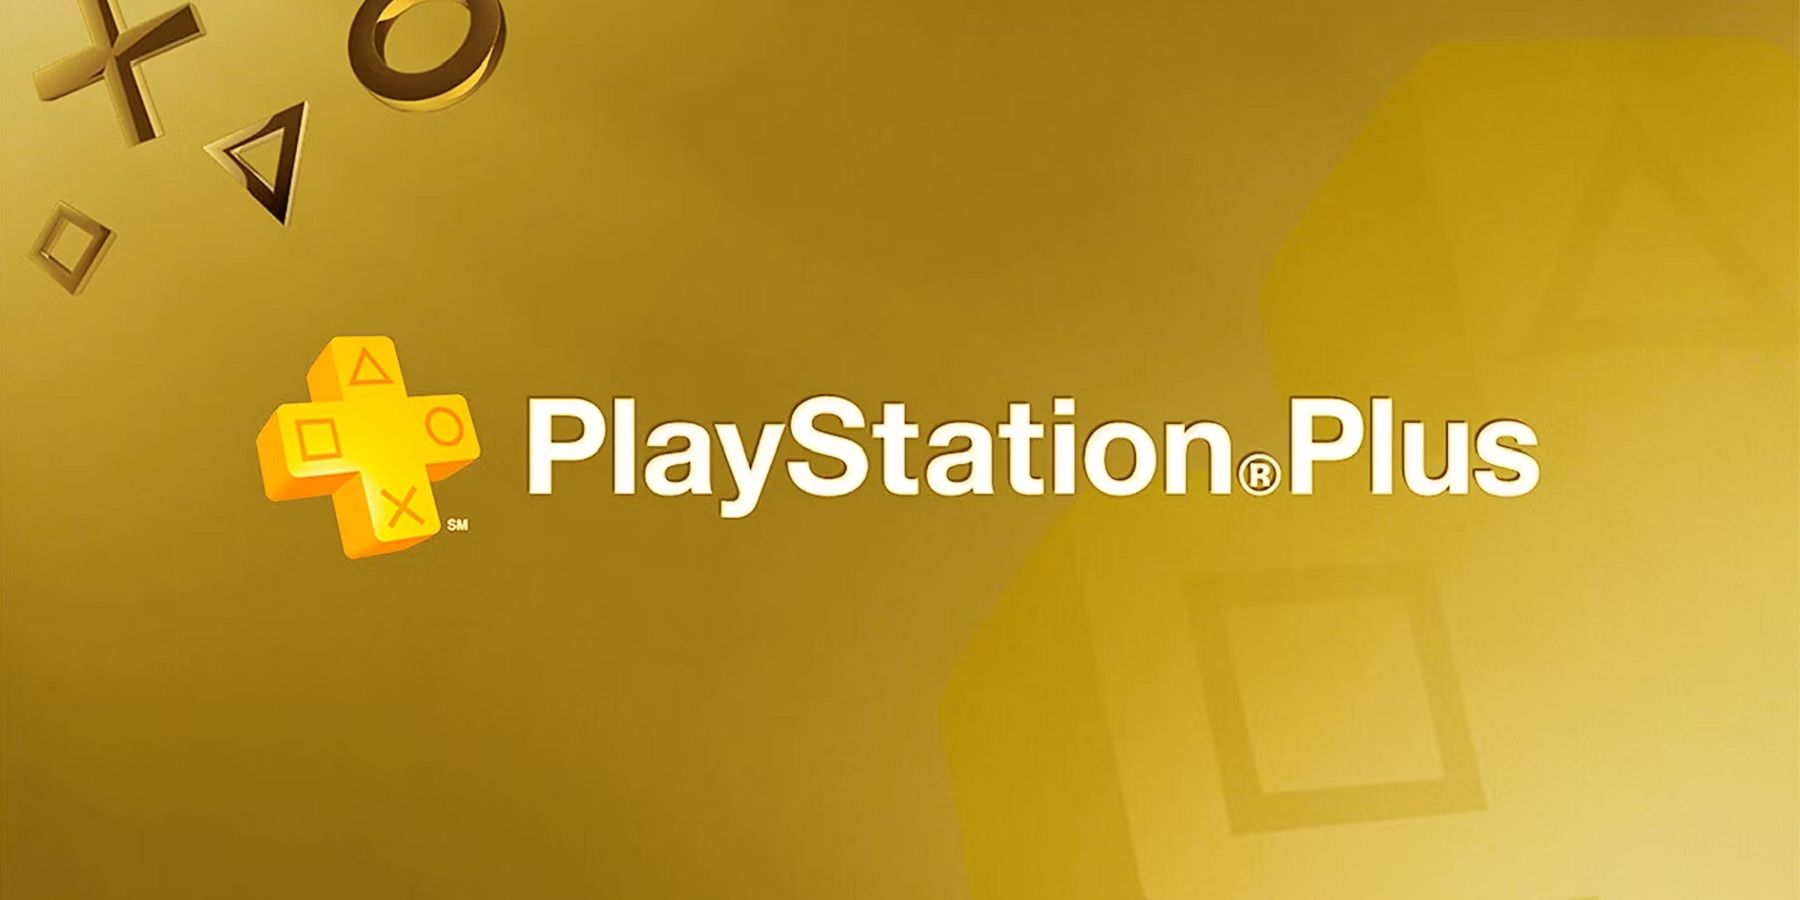 PlayStation Plus Game Catalog March 2023 announced, includes